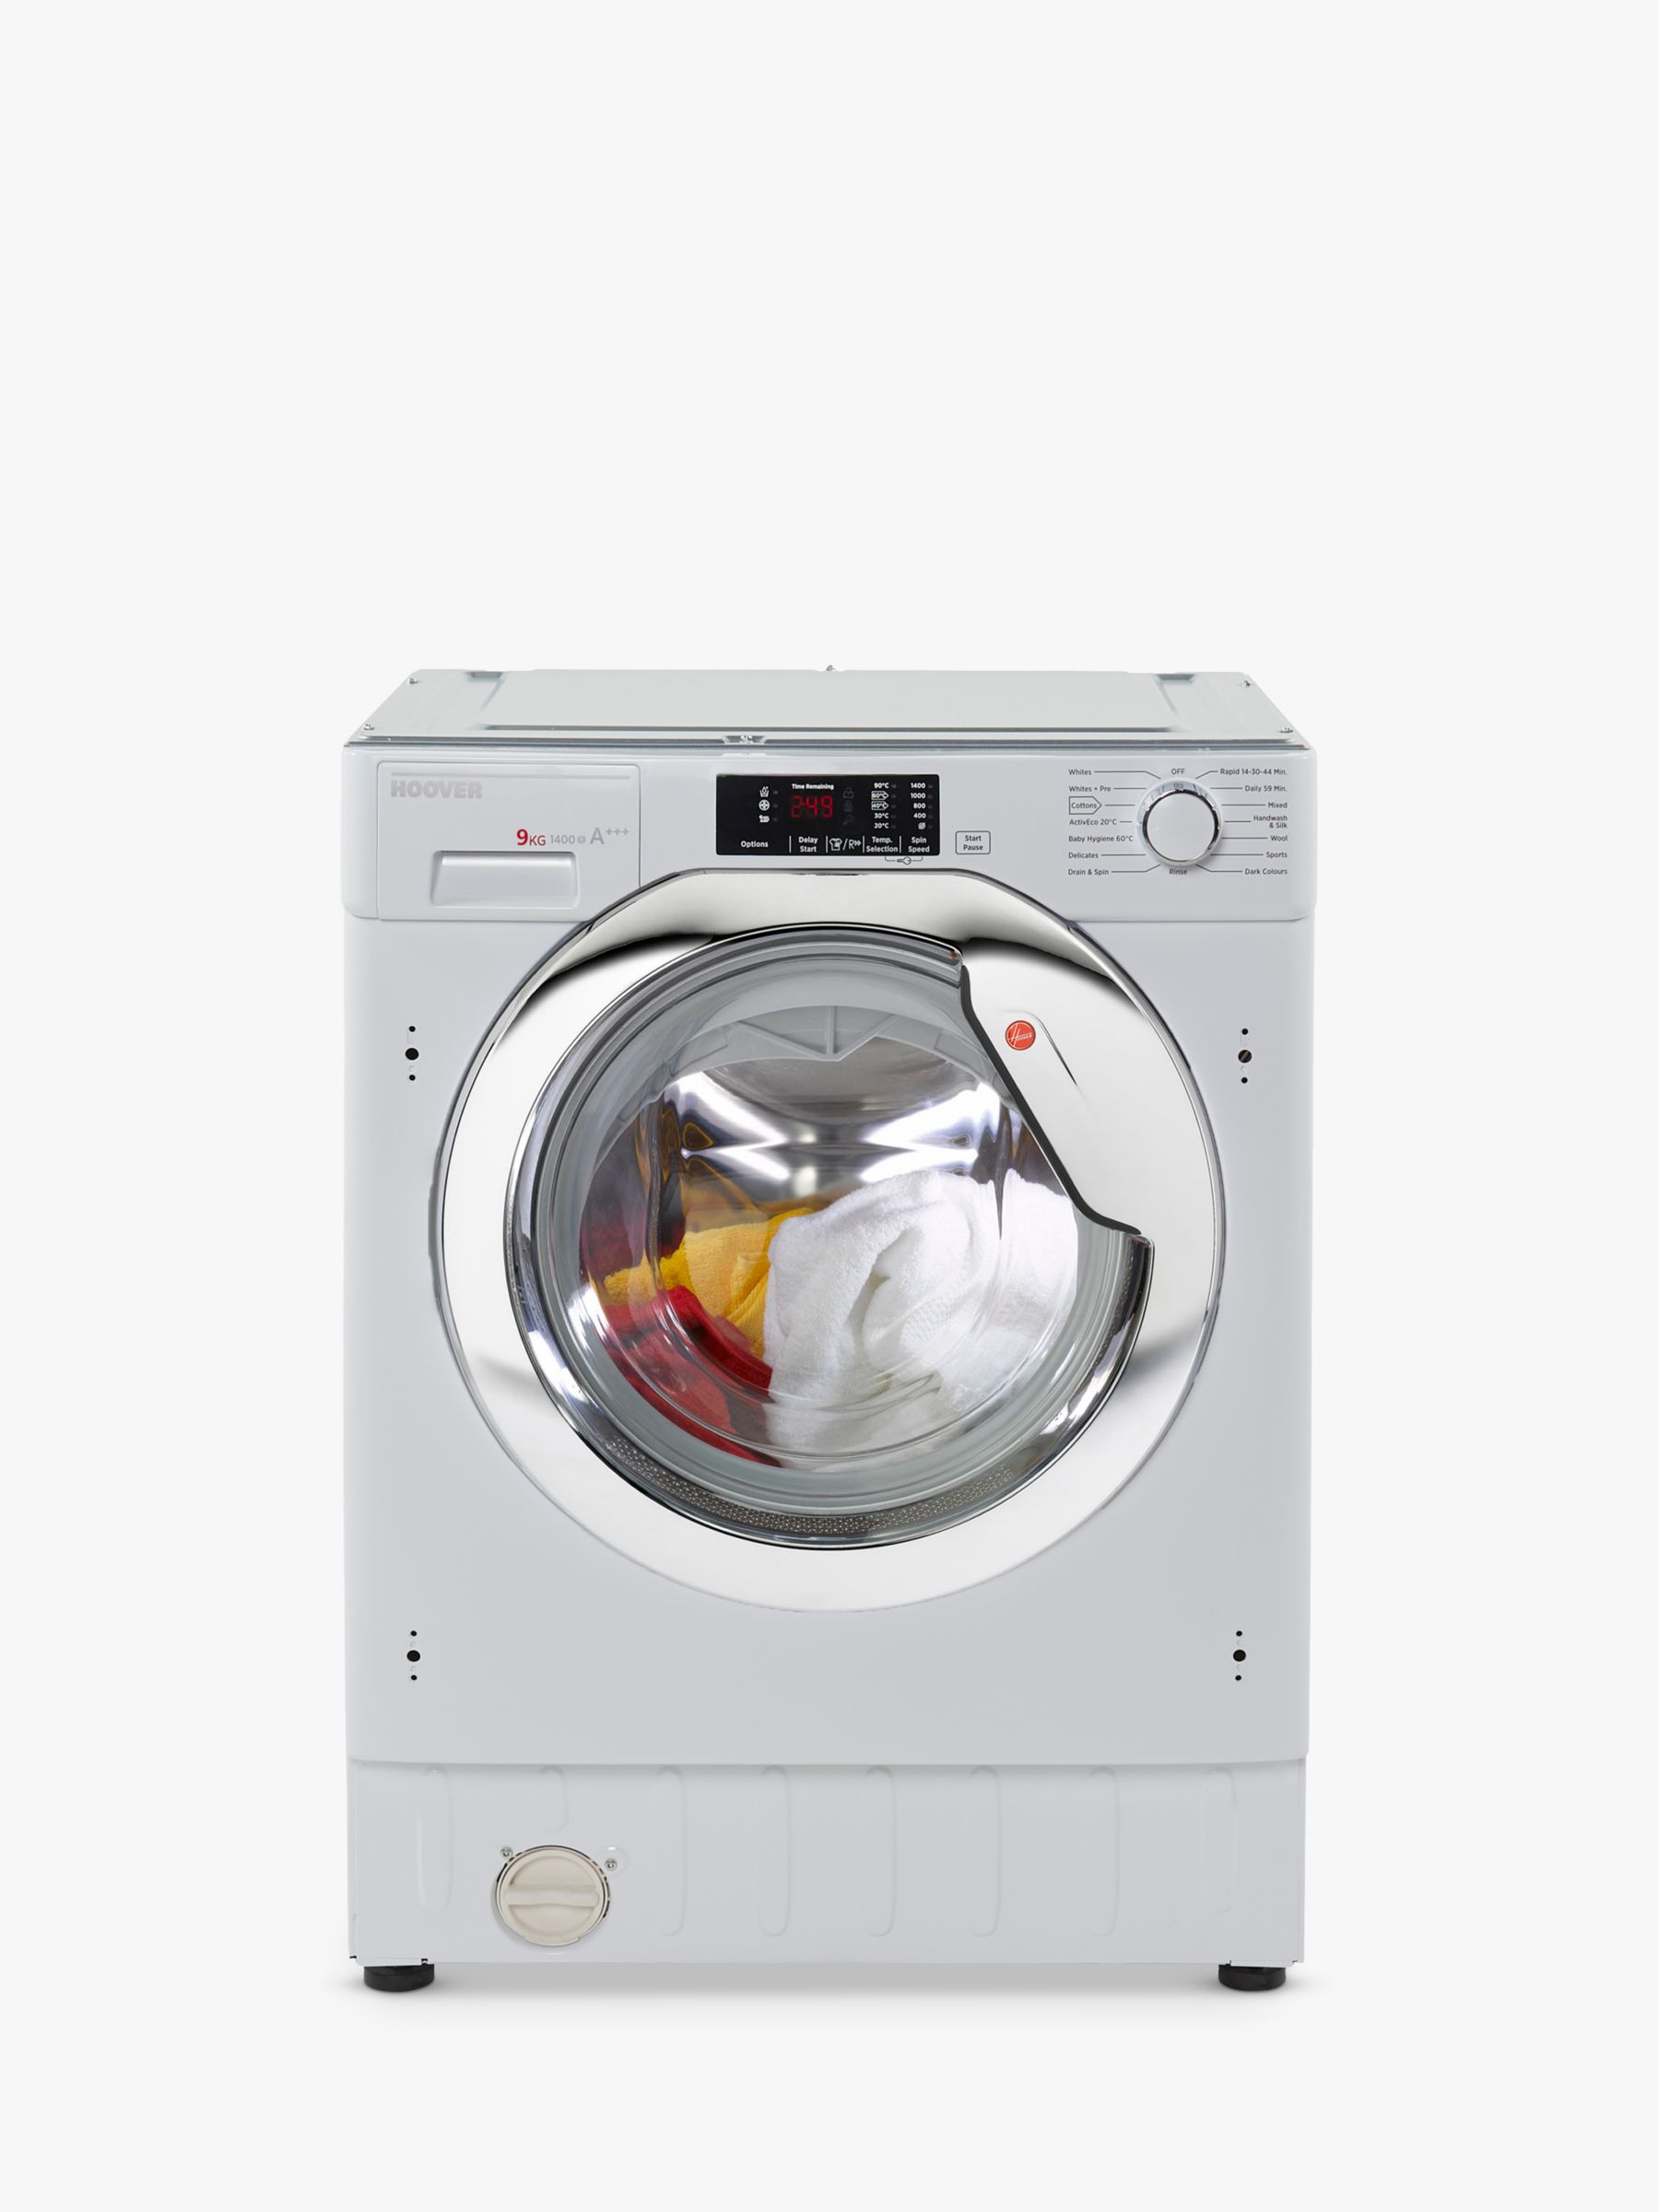 Hoover HBWM 914DC-80 Integrated Washing Machine, 9kg Load, A+++ Energy Rating, 1400rpm, White with Chrome Door